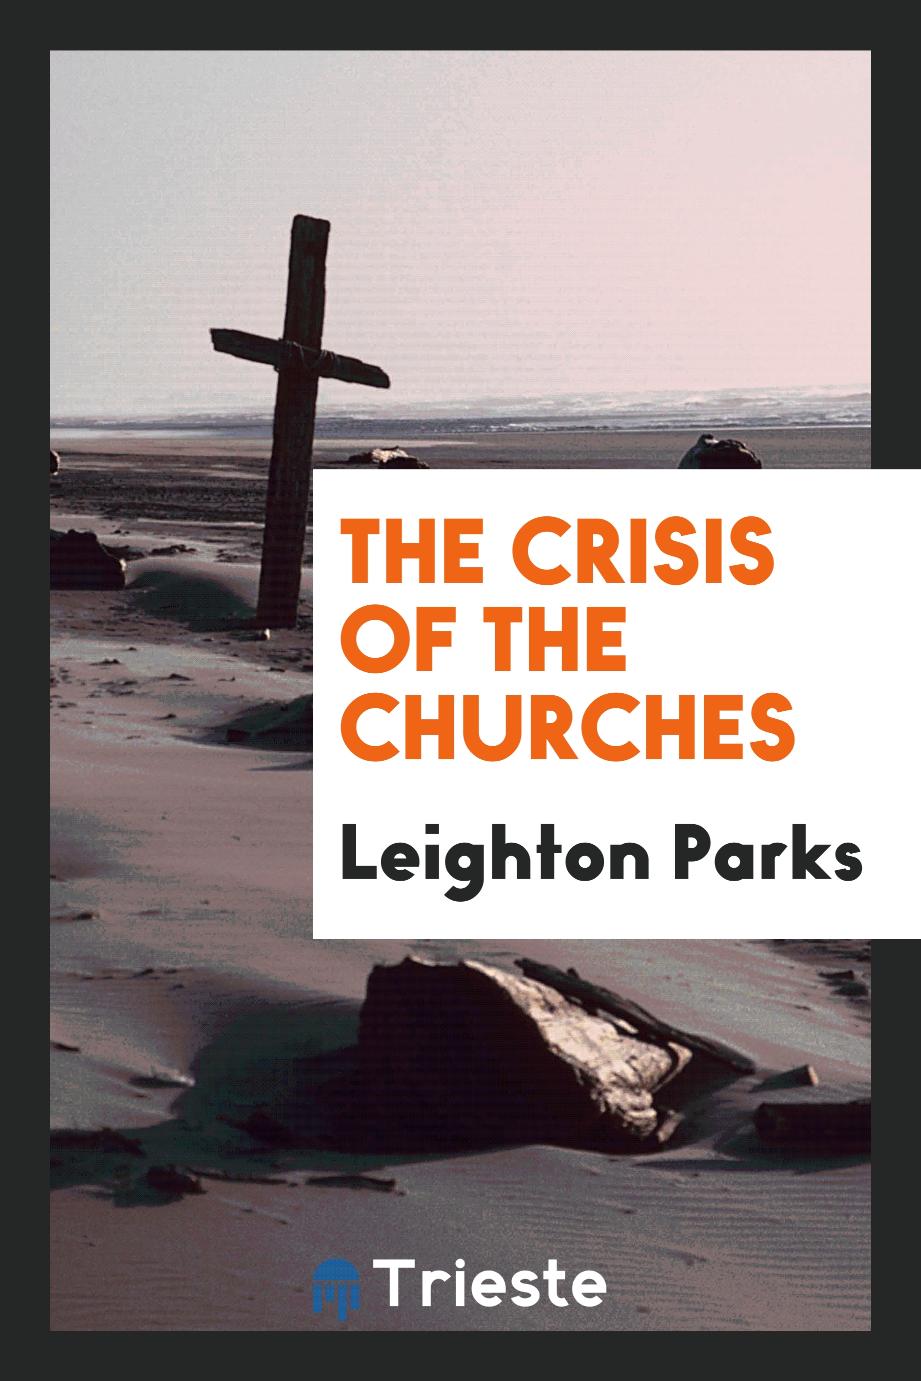 The crisis of the churches